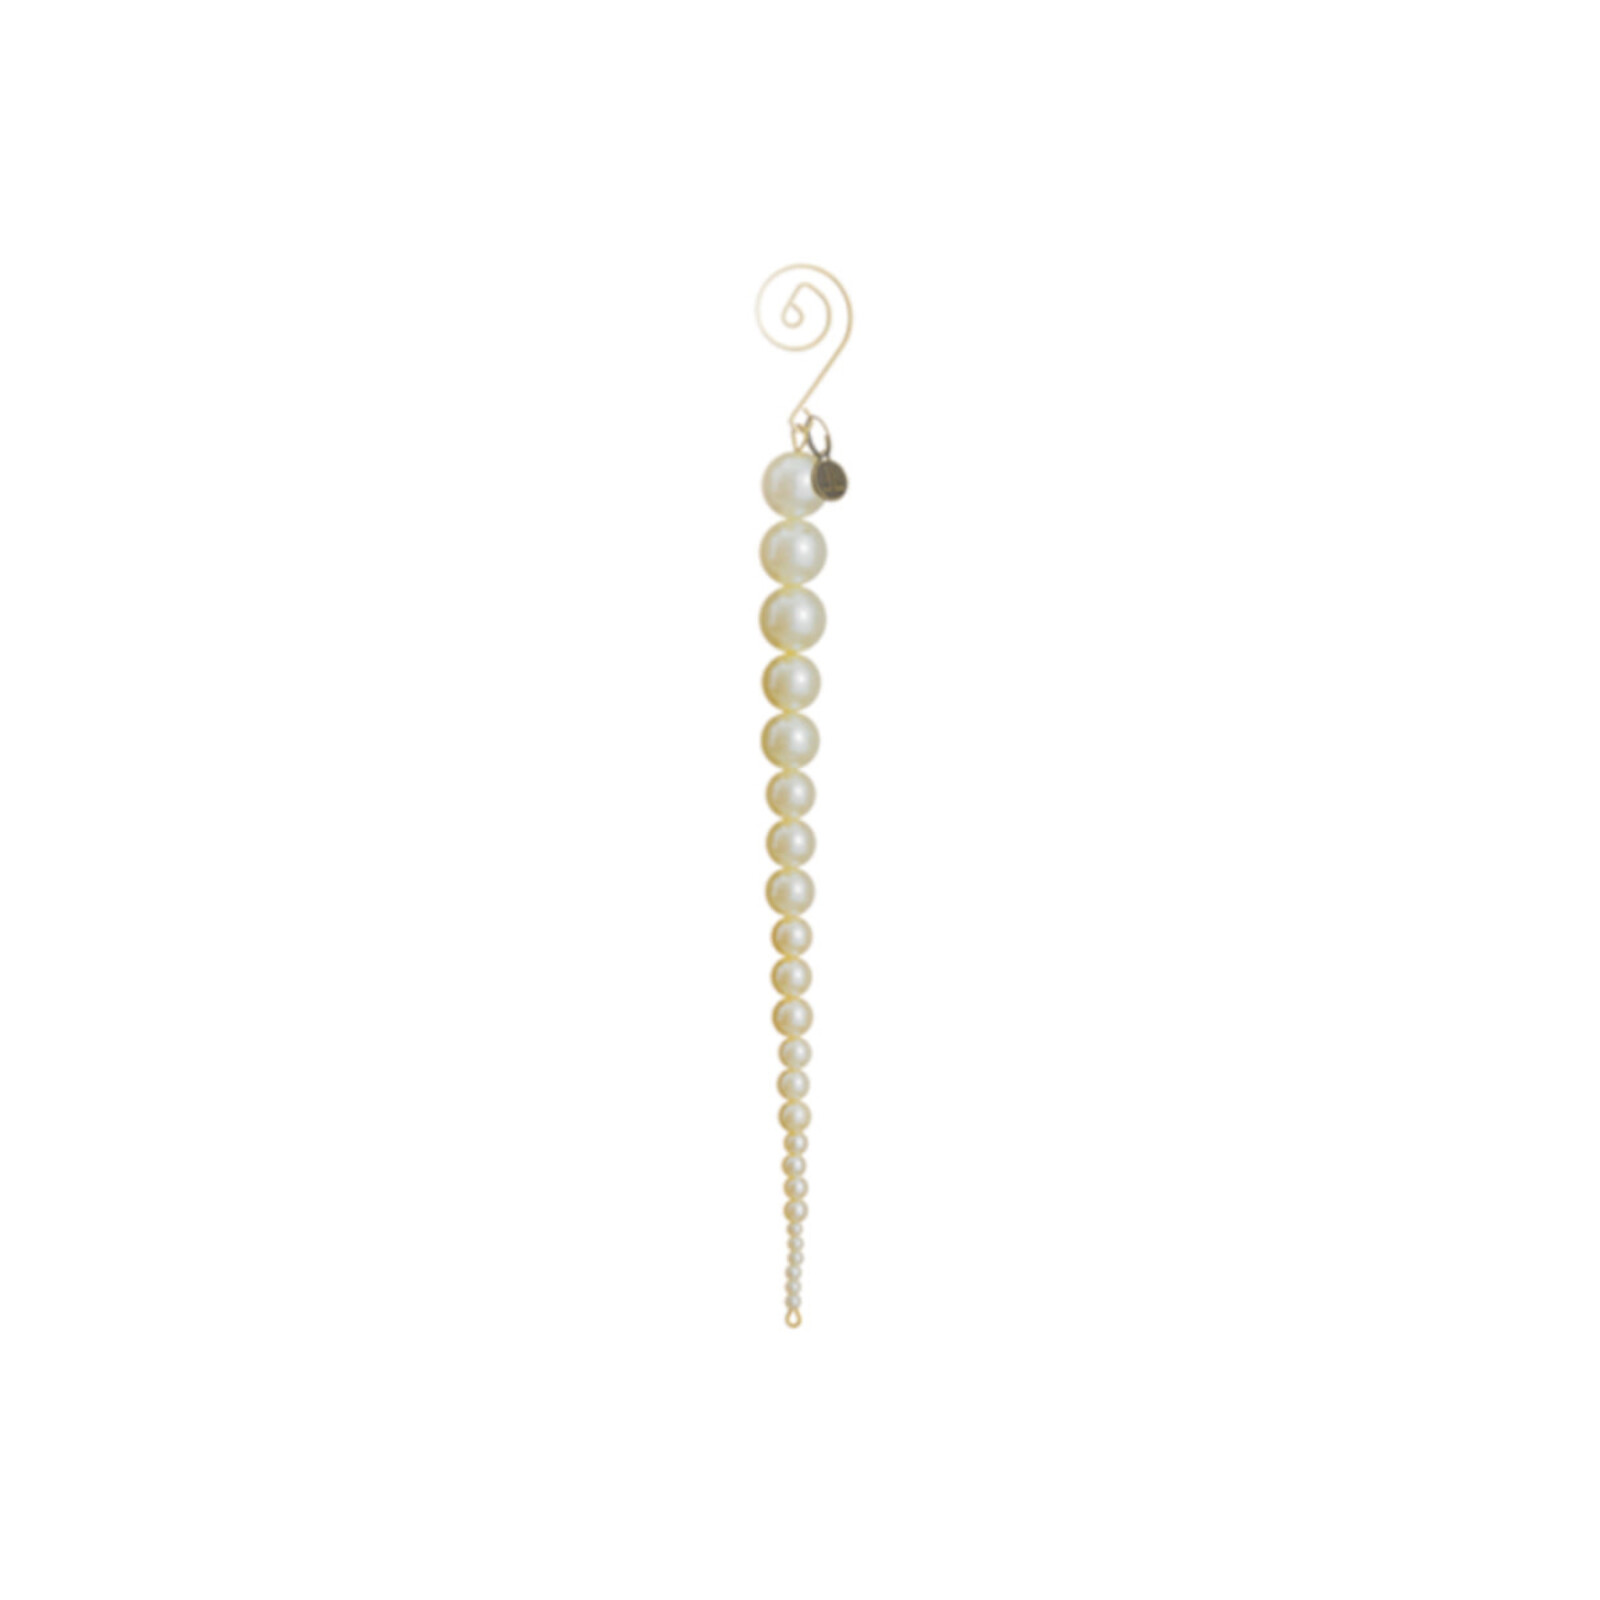 Allstate Floral & Craft INC. 8''PEARL ICICLE ORNAMENT PEA loading=